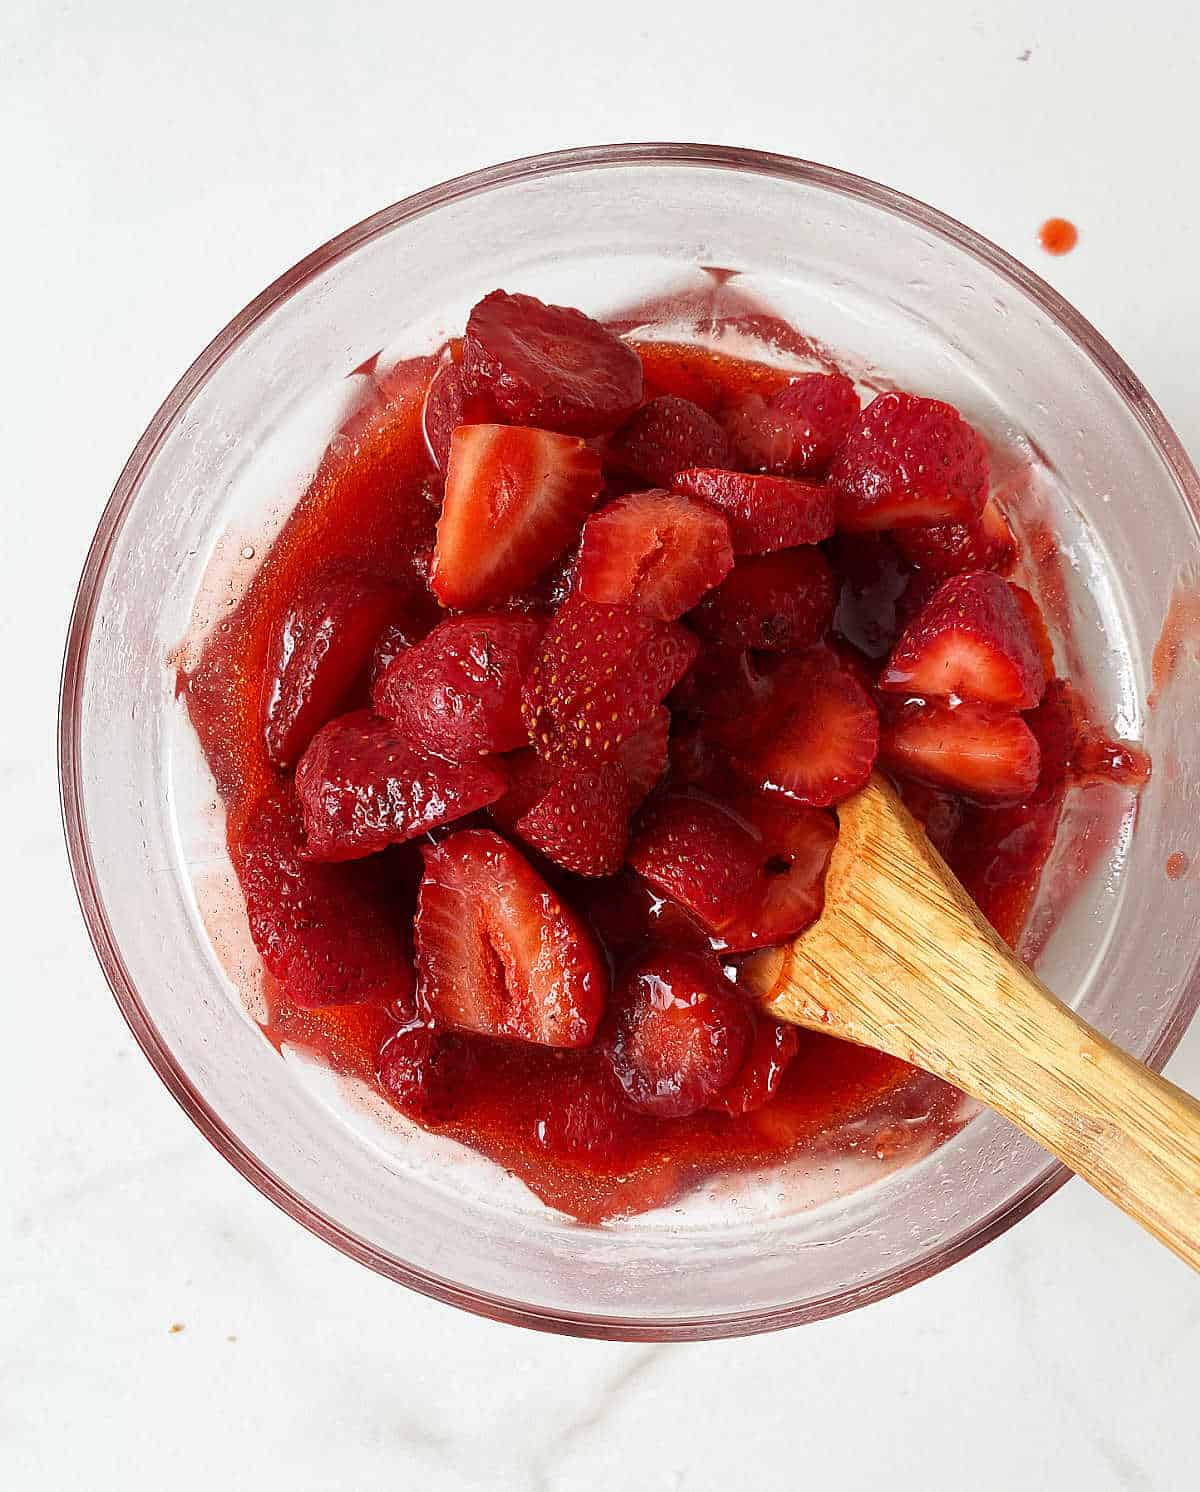 Glass bowl with strawberry sauce and fresh chopped strawberries, a wooden spoon inside, white surface